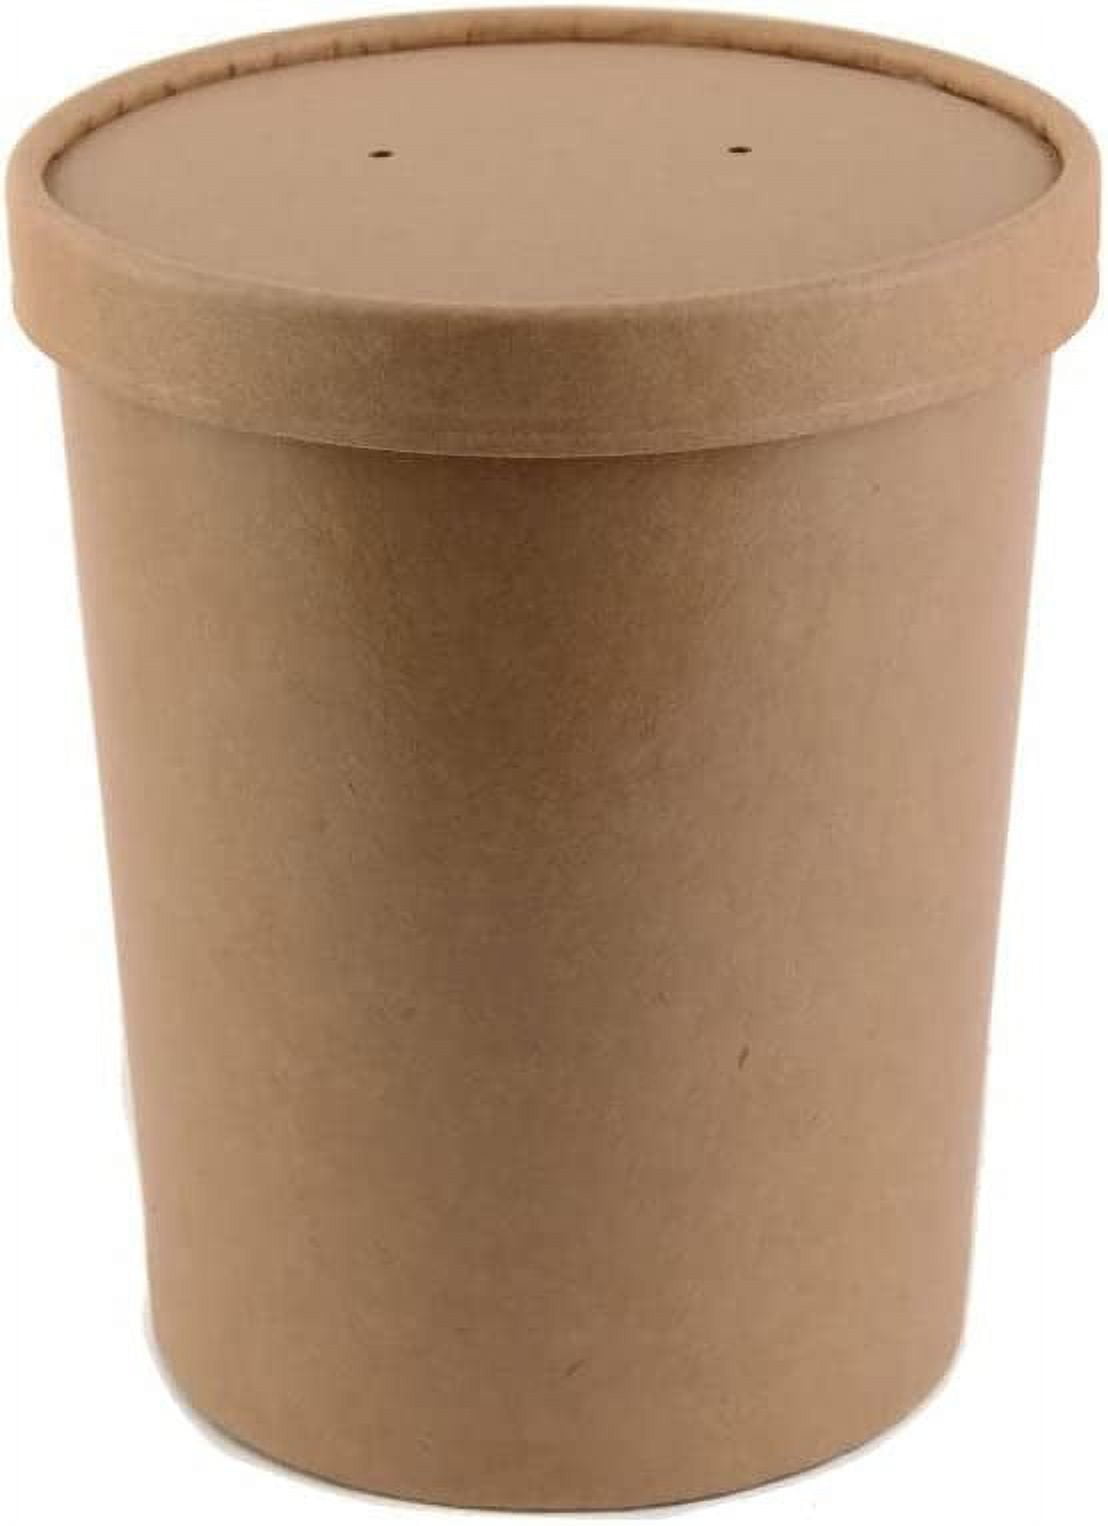 200 Pack] 32 oz Disposable Kraft Paper Soup Containers with Vented